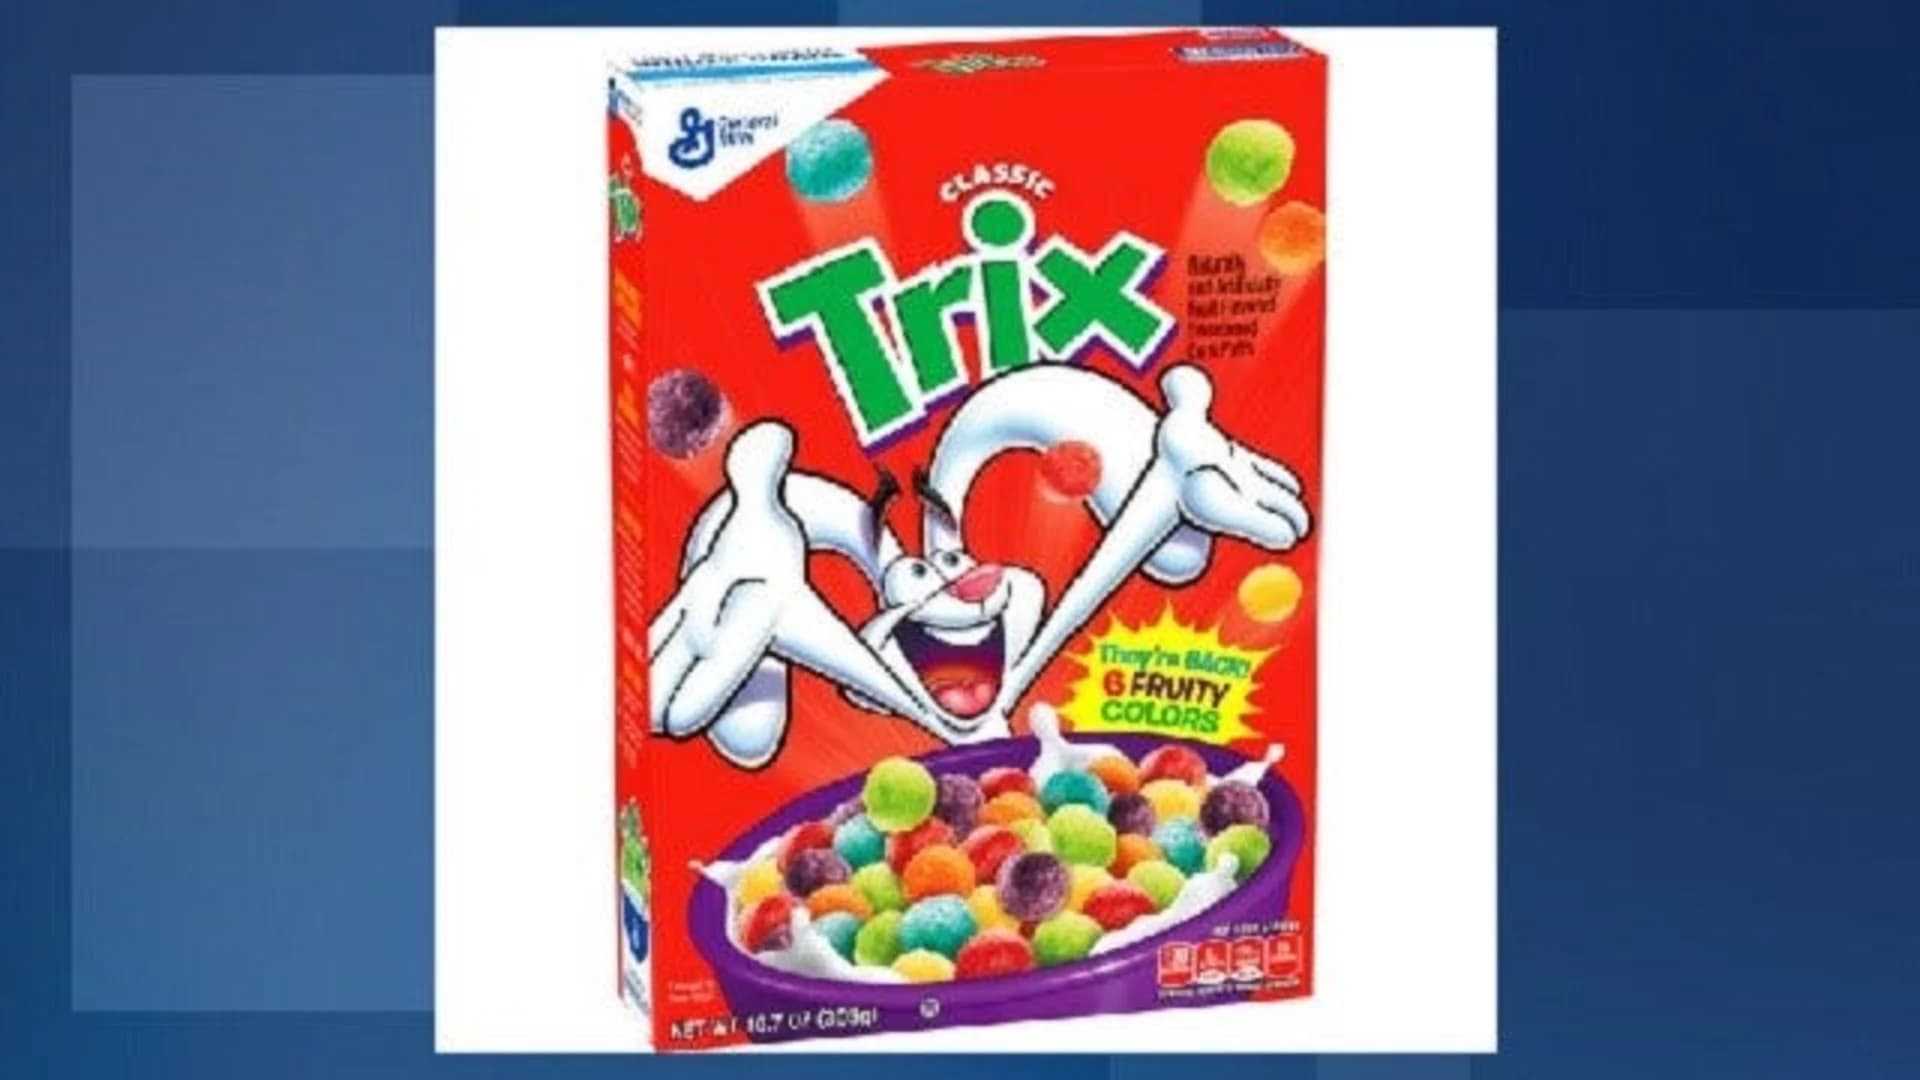 Original Trix, made with artificial colors, is coming back